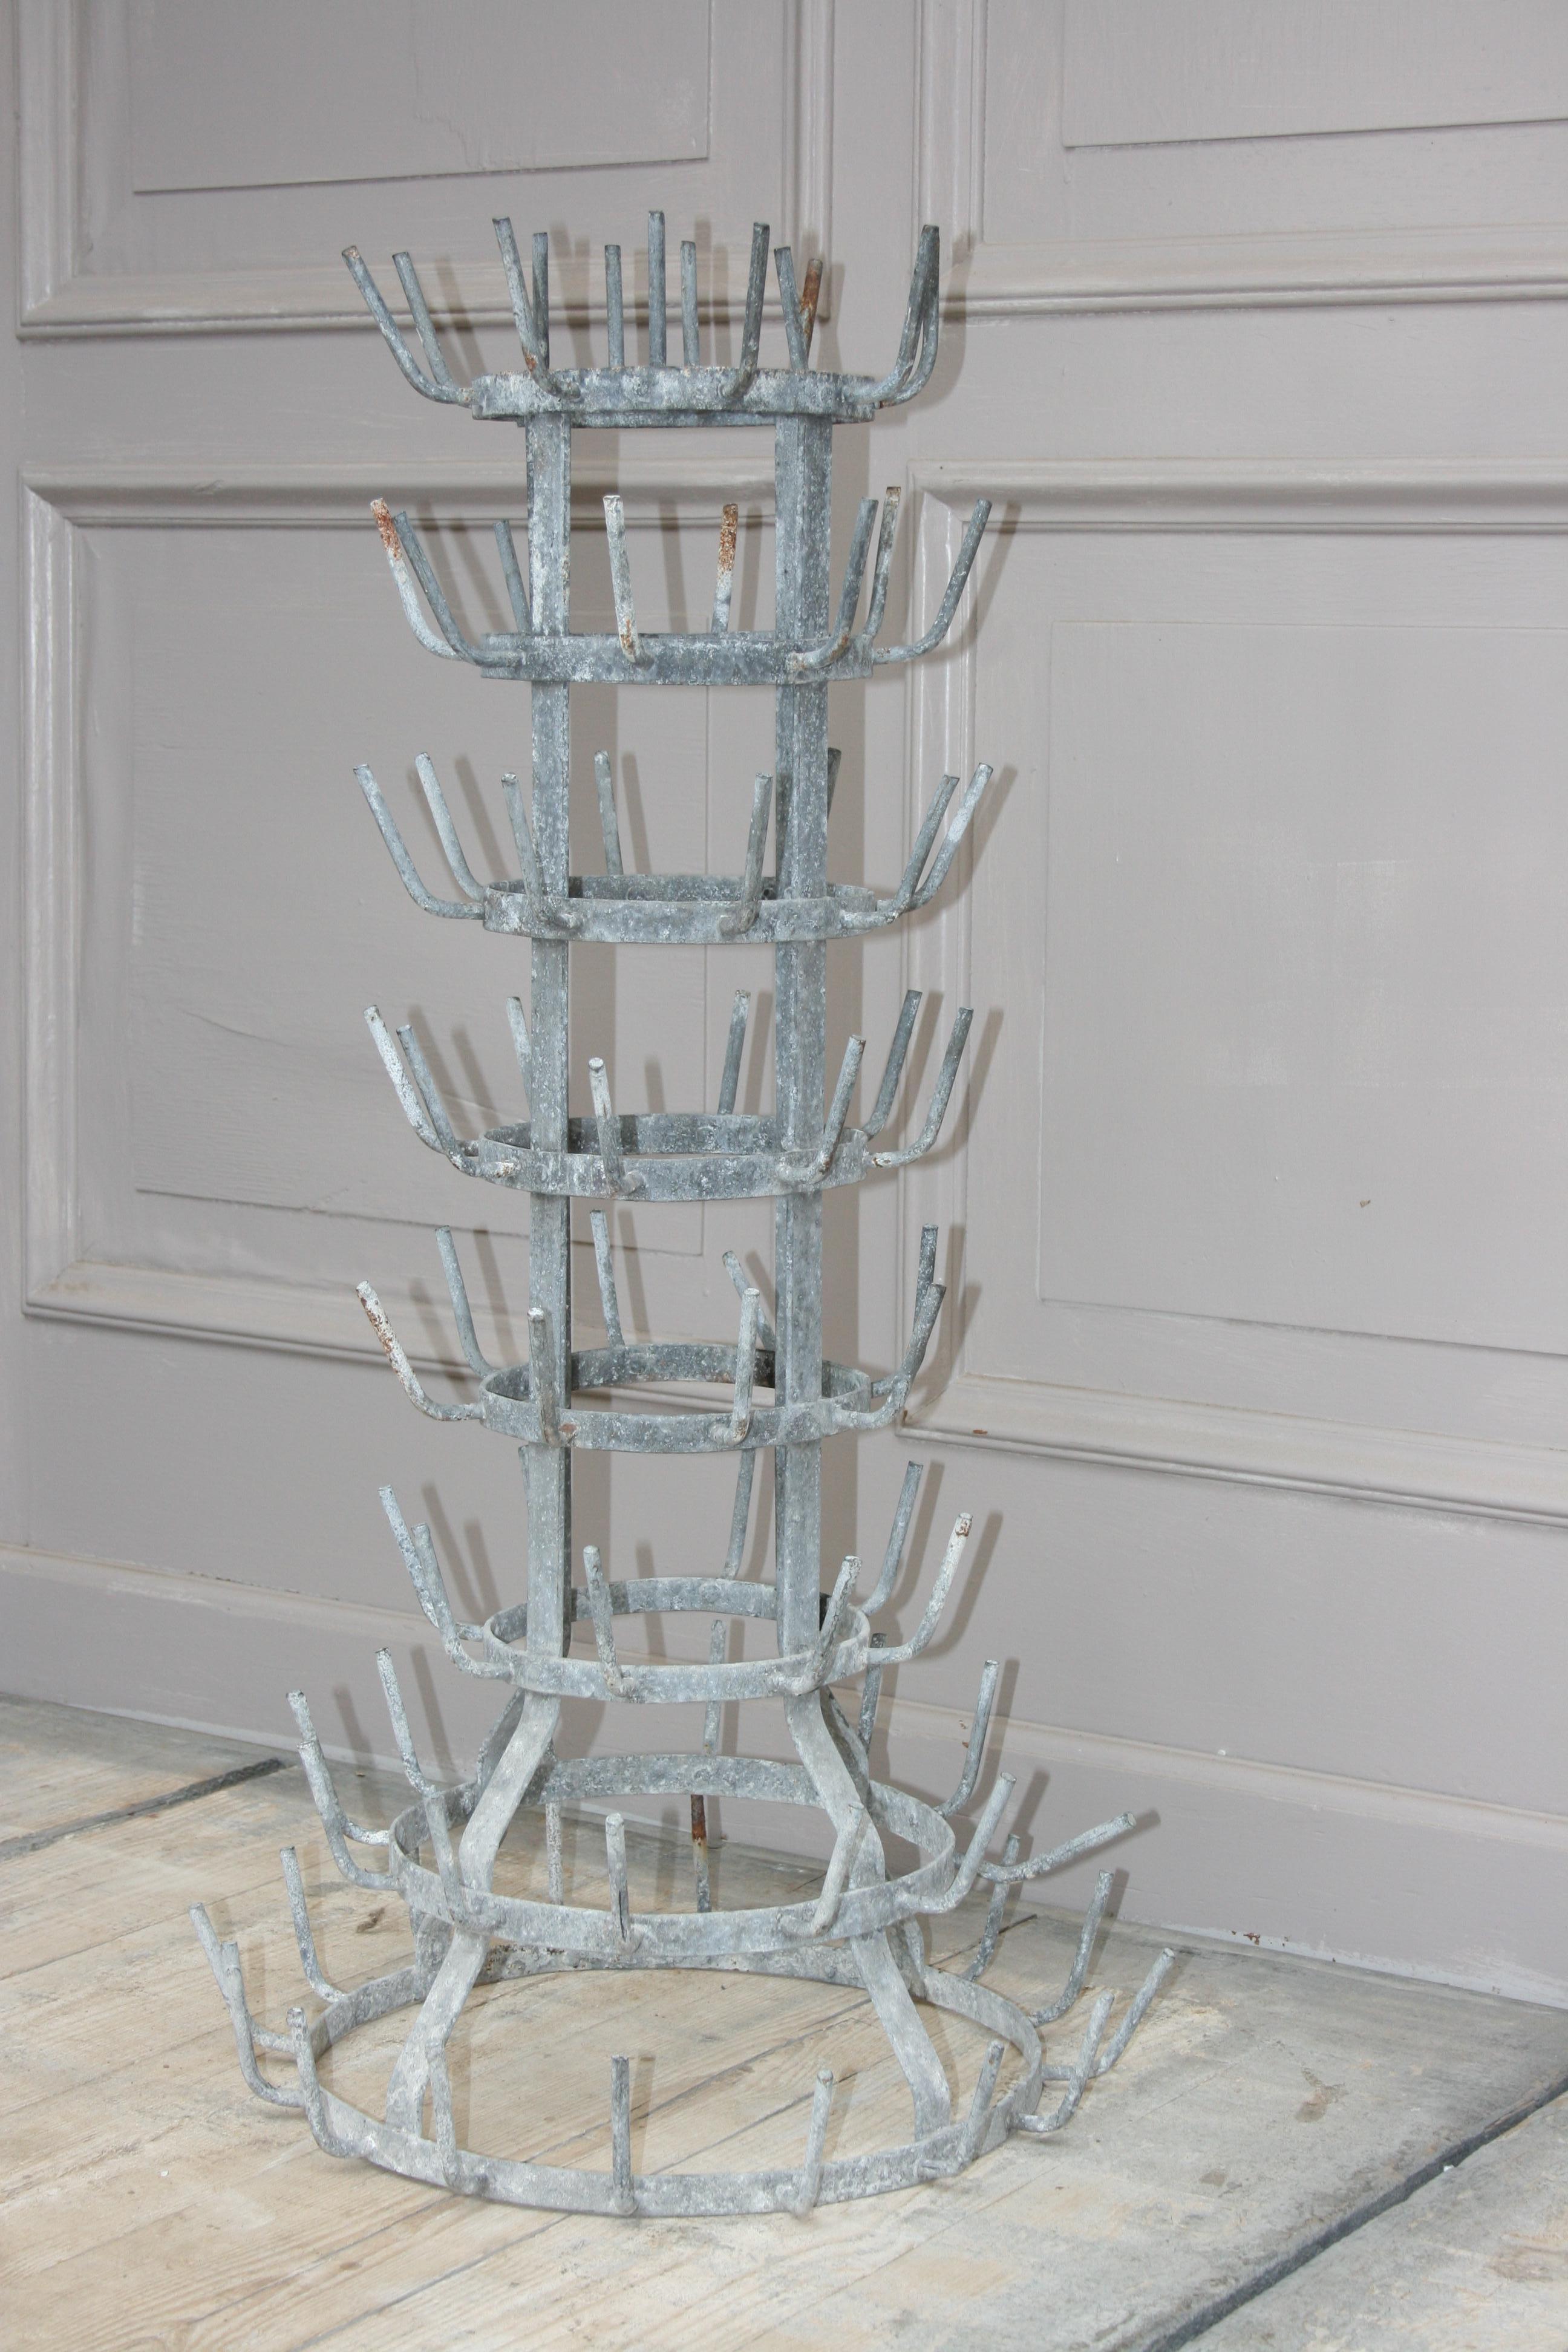 Original vintage bottle dryer or bottle holder in the style of the well-known 